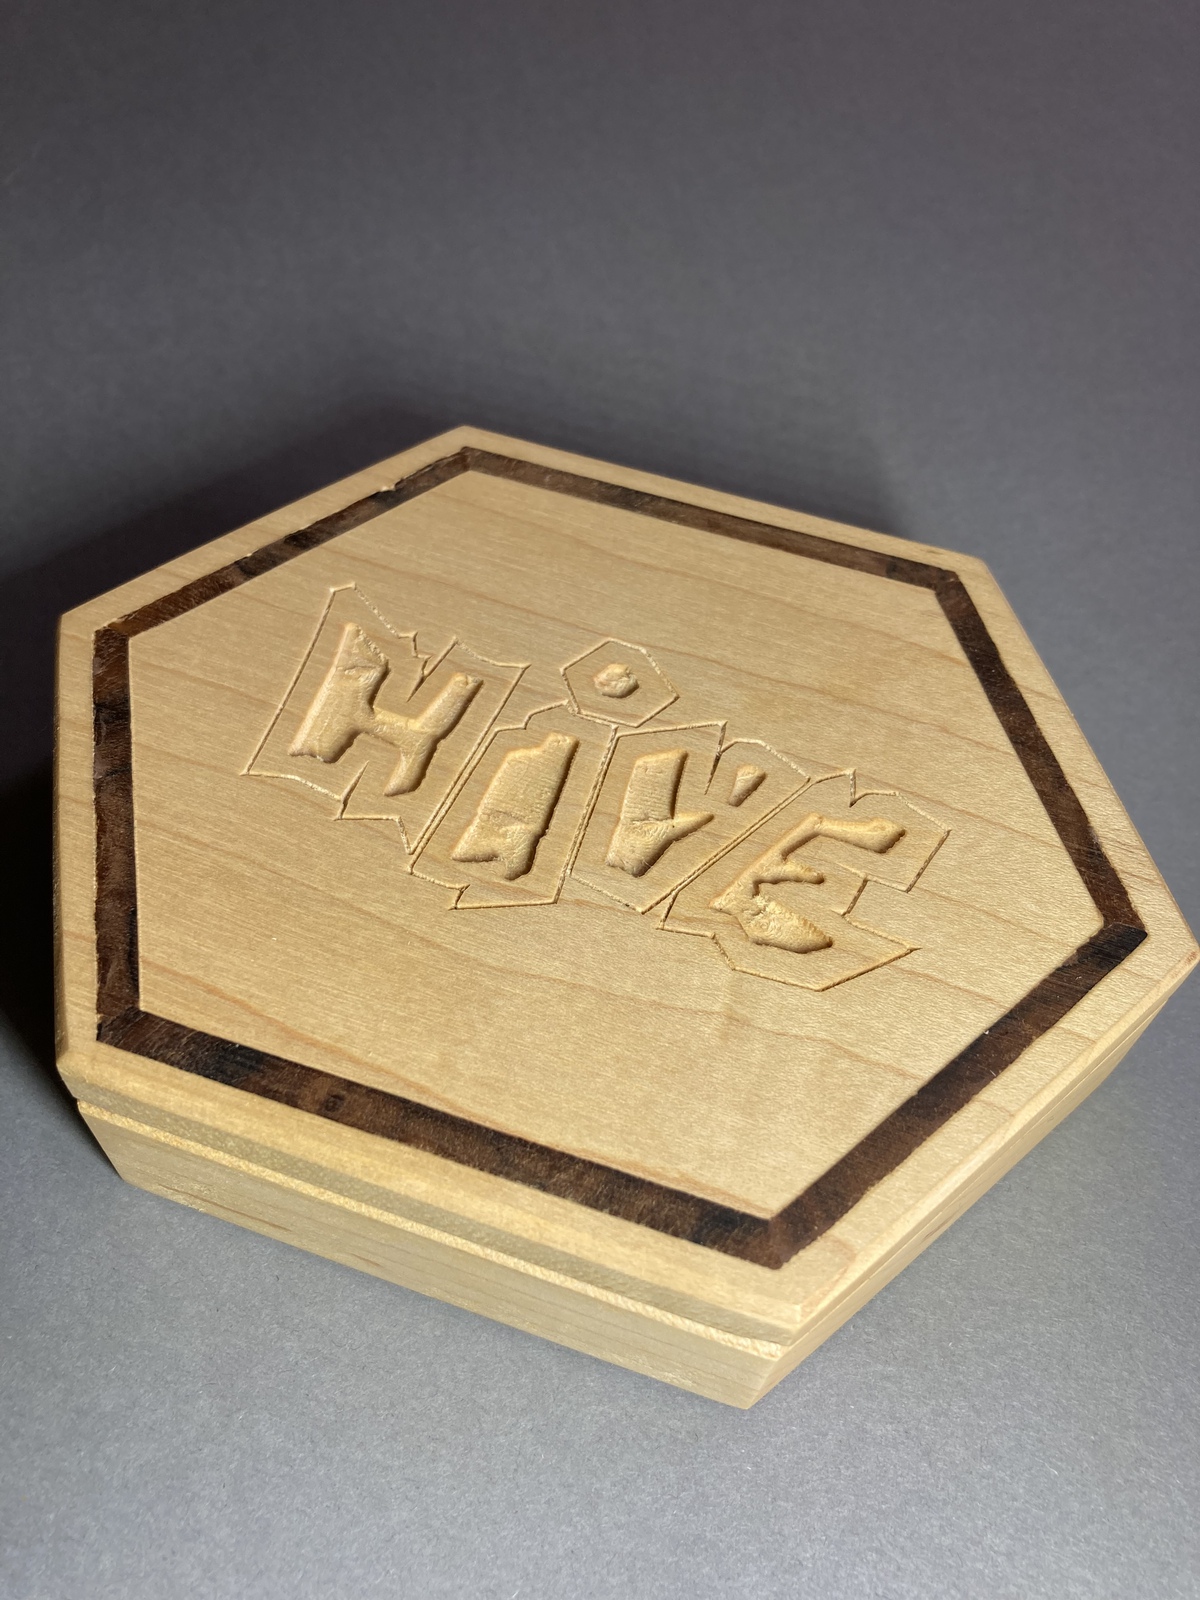 Wooden Hive Pocket Box (for Hive Pocket and Pillbug)